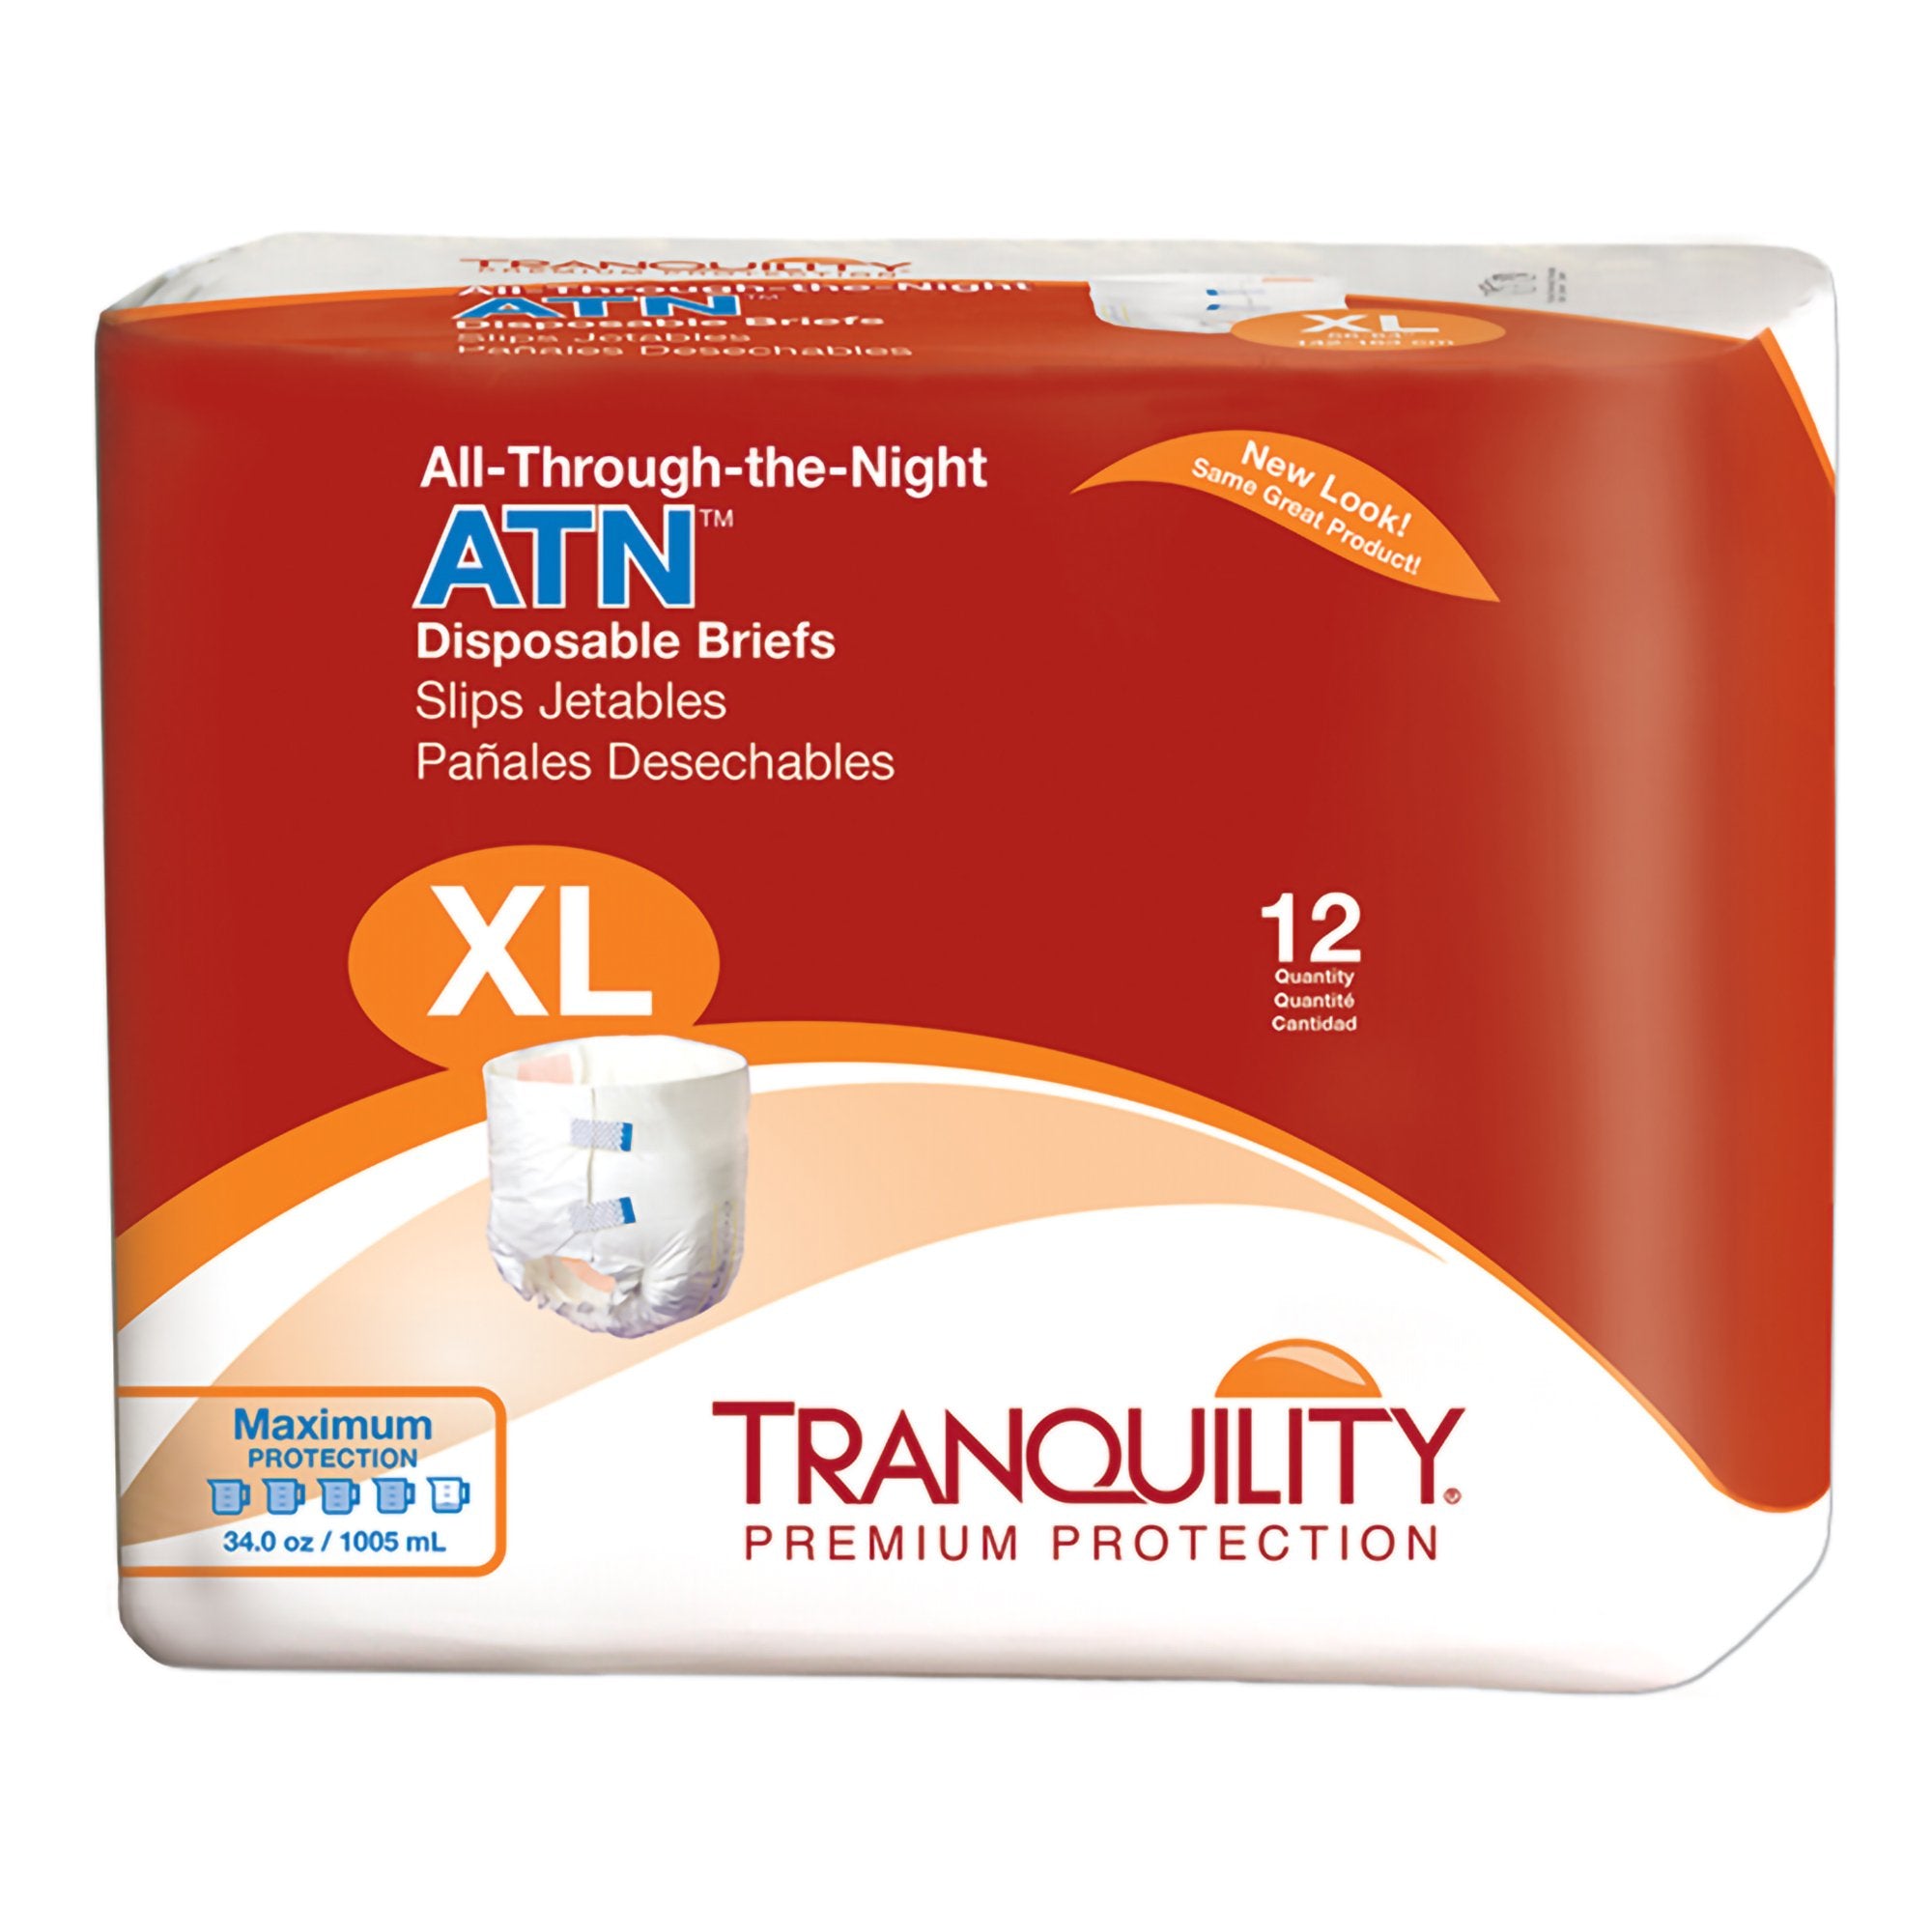 Tranquility? ATN Heavy Protection Incontinence Brief, Extra Large